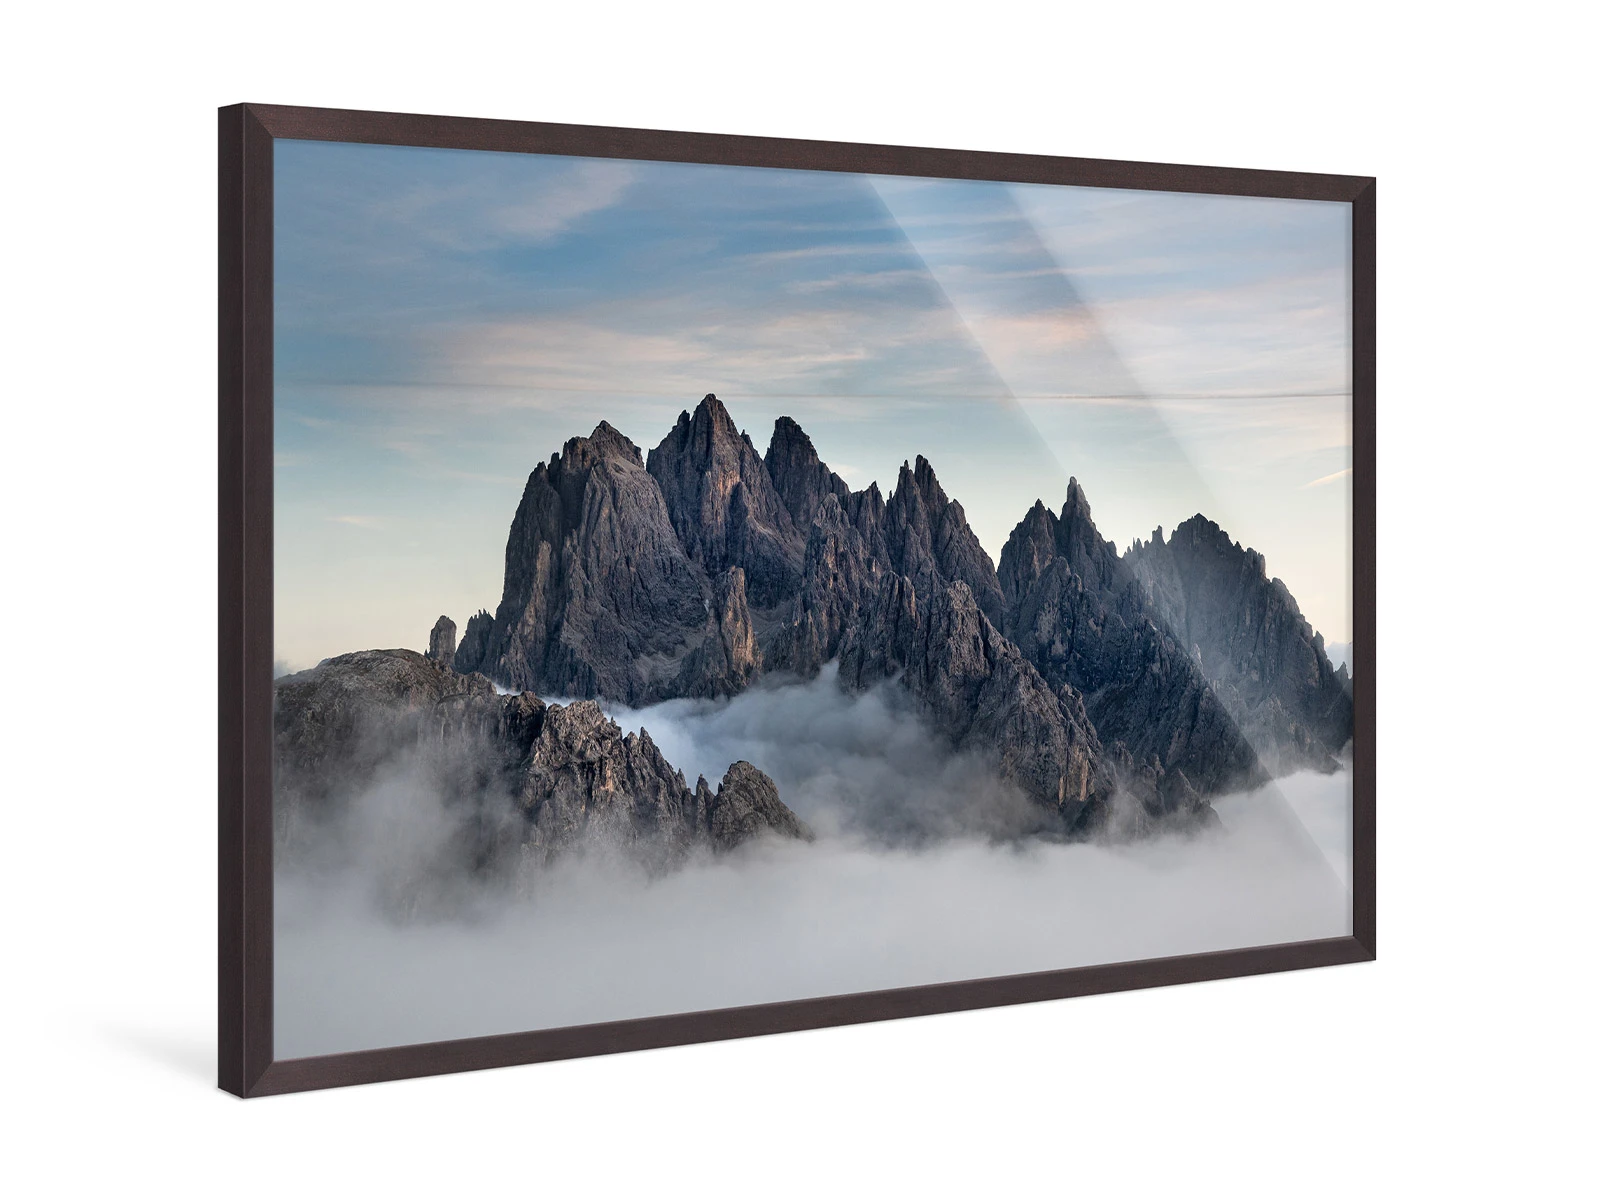 Overcast cloud in a mountain range in a Gallery Frame. 